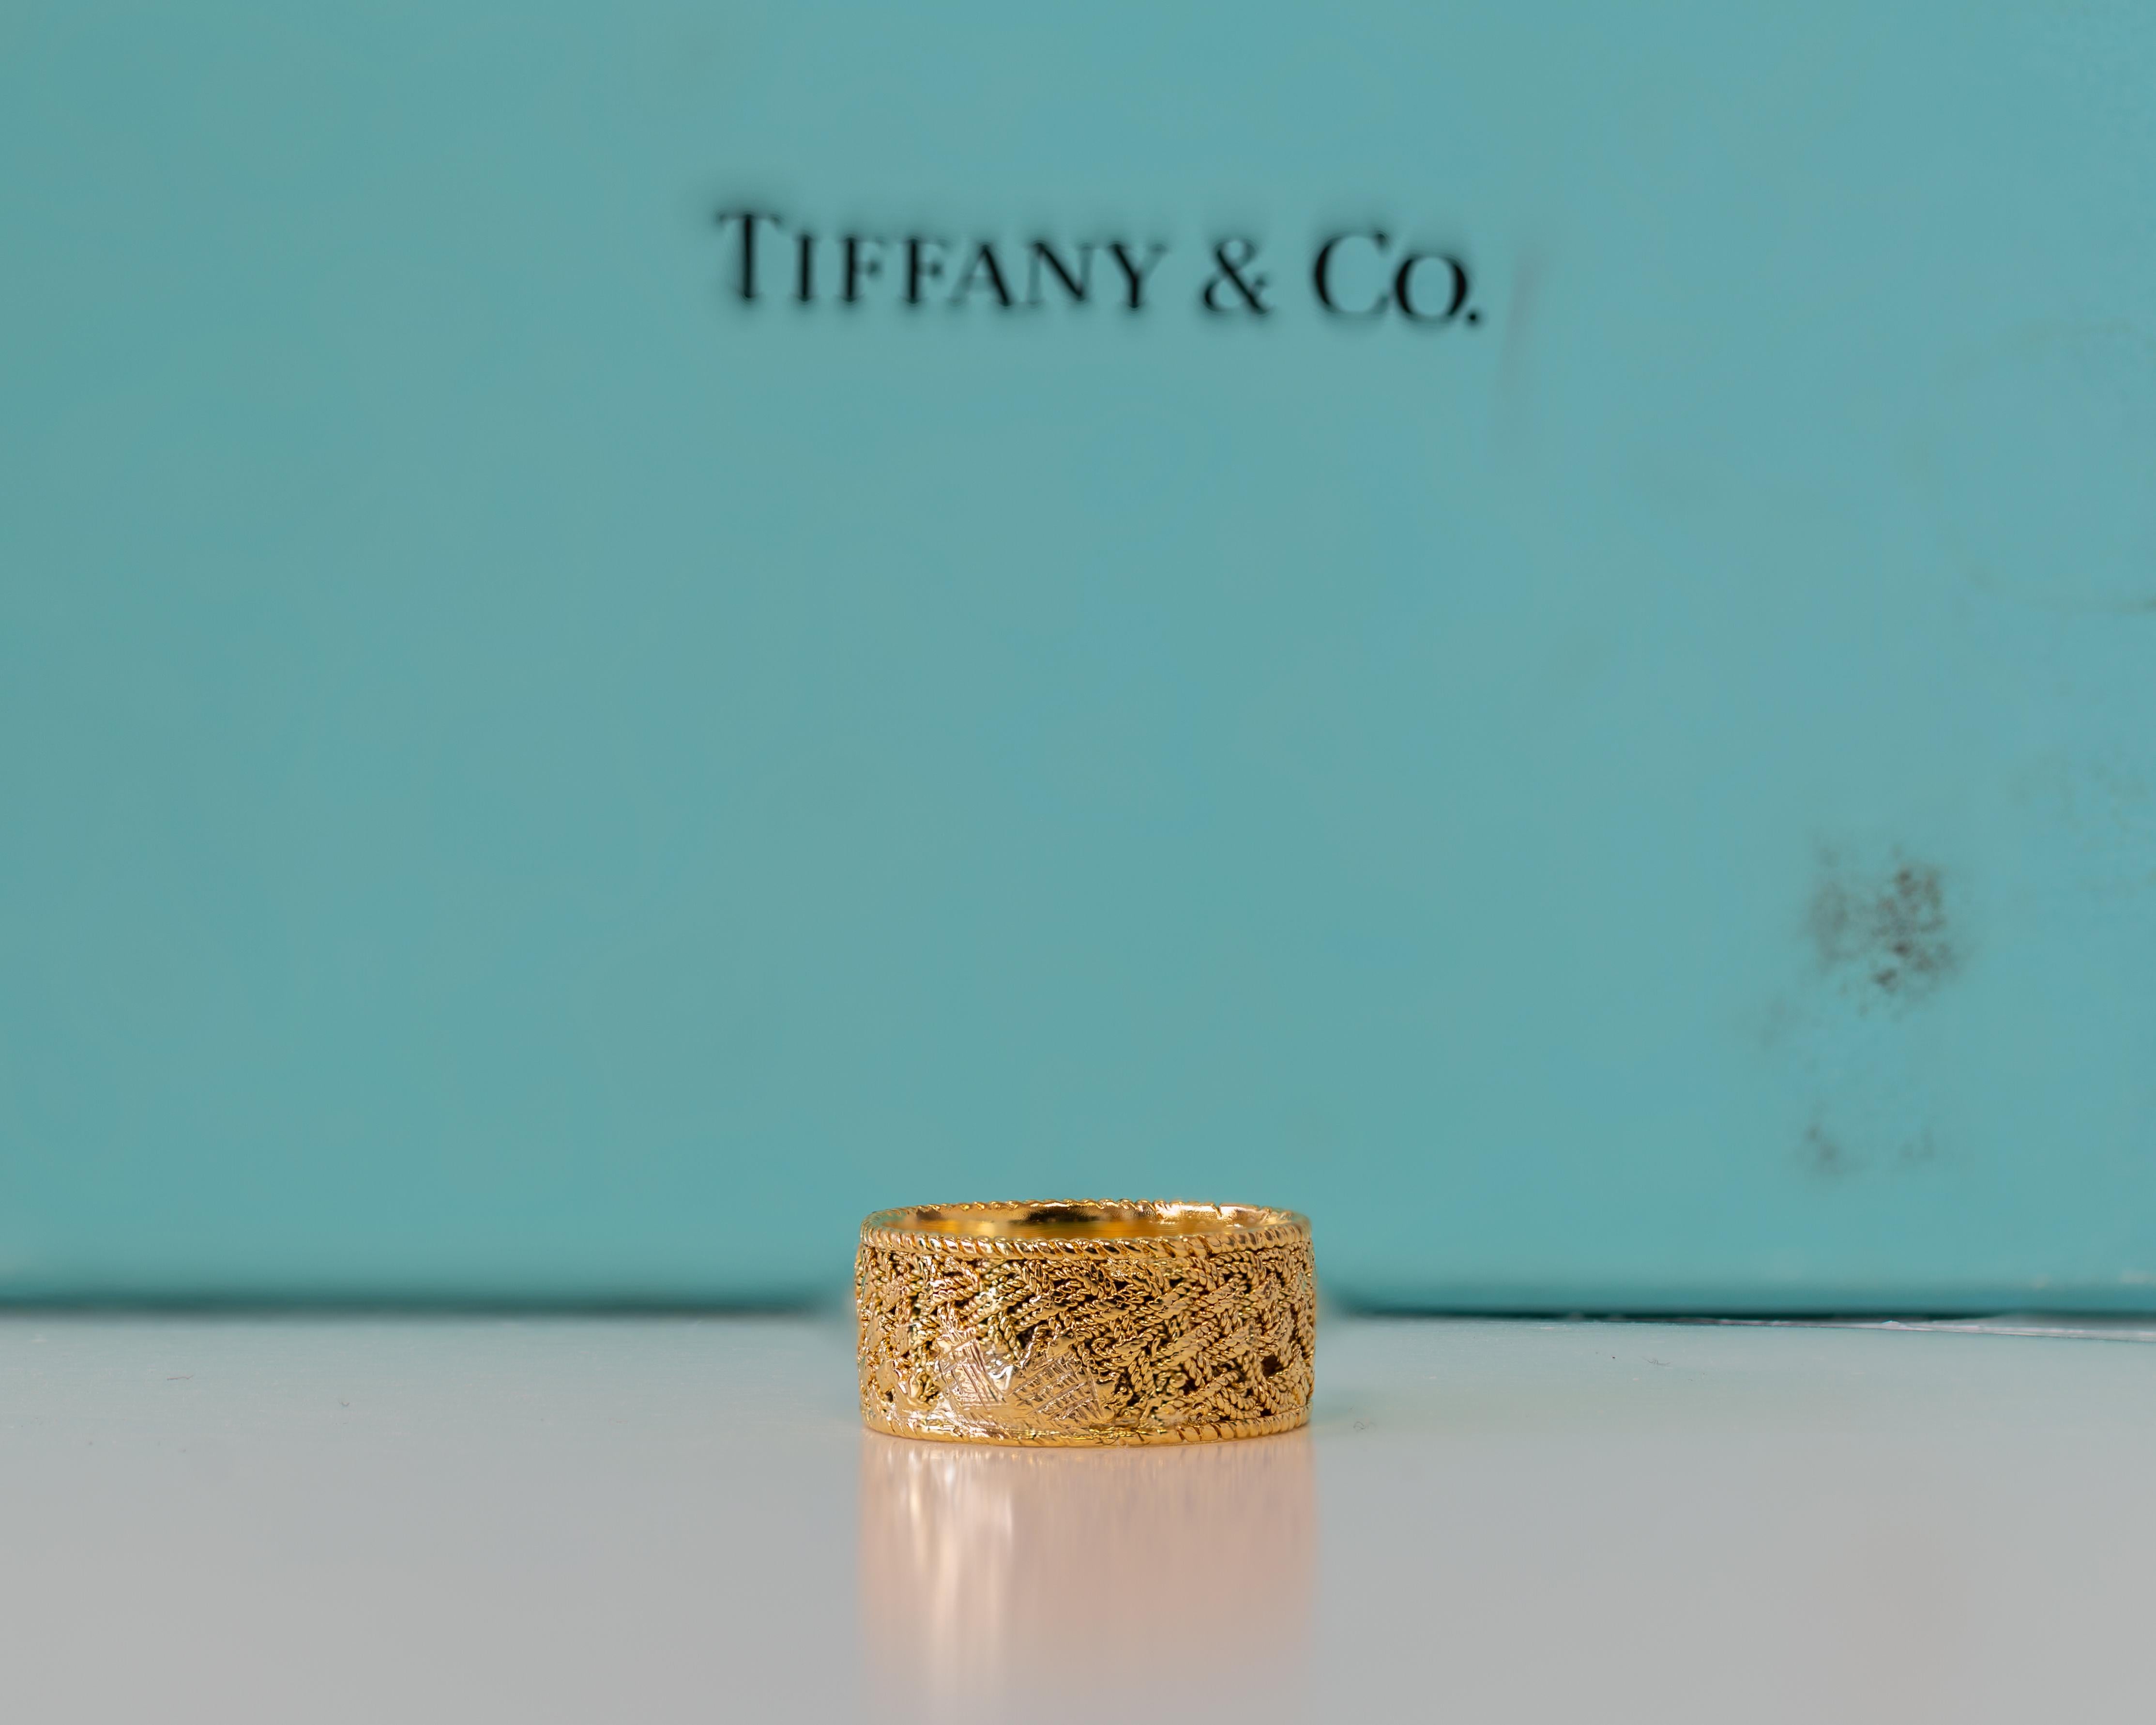 18 Karat Yellow Gold Tiffany & Co. Woven / Mesh Style Band Ring In Good Condition For Sale In Atlanta, GA